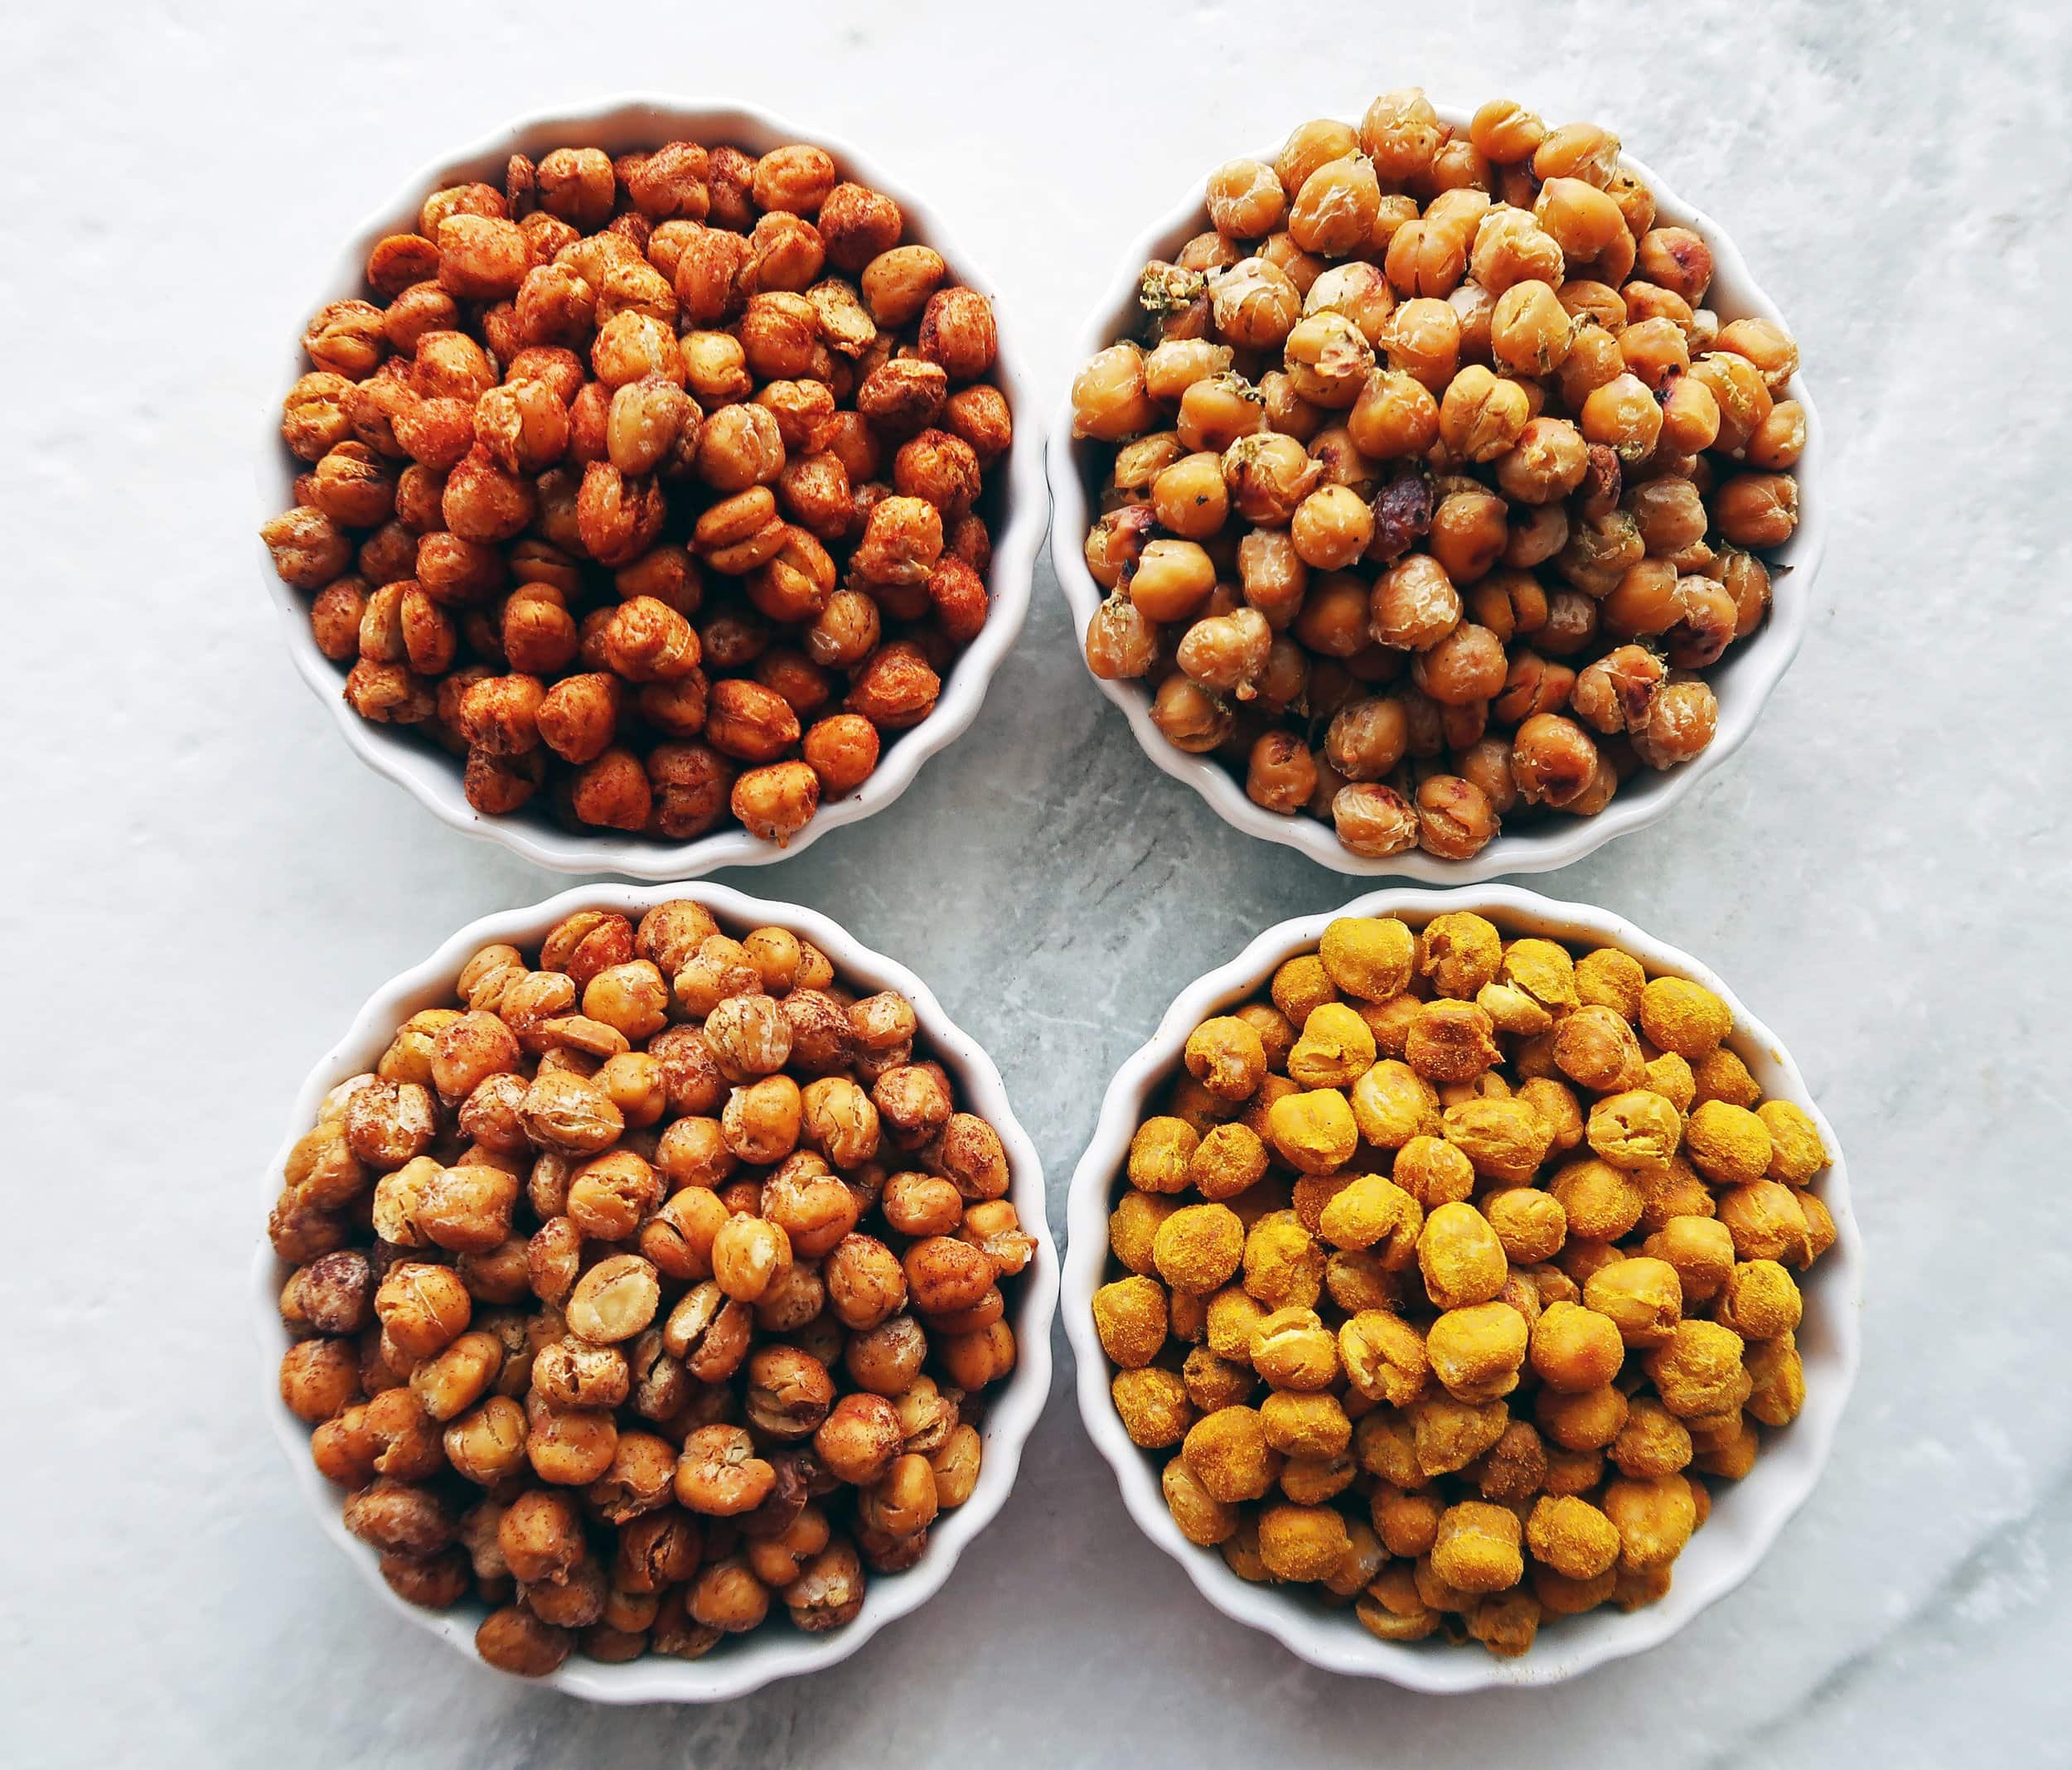 Four bowls of crunchy, oven-roasted chickpeas.